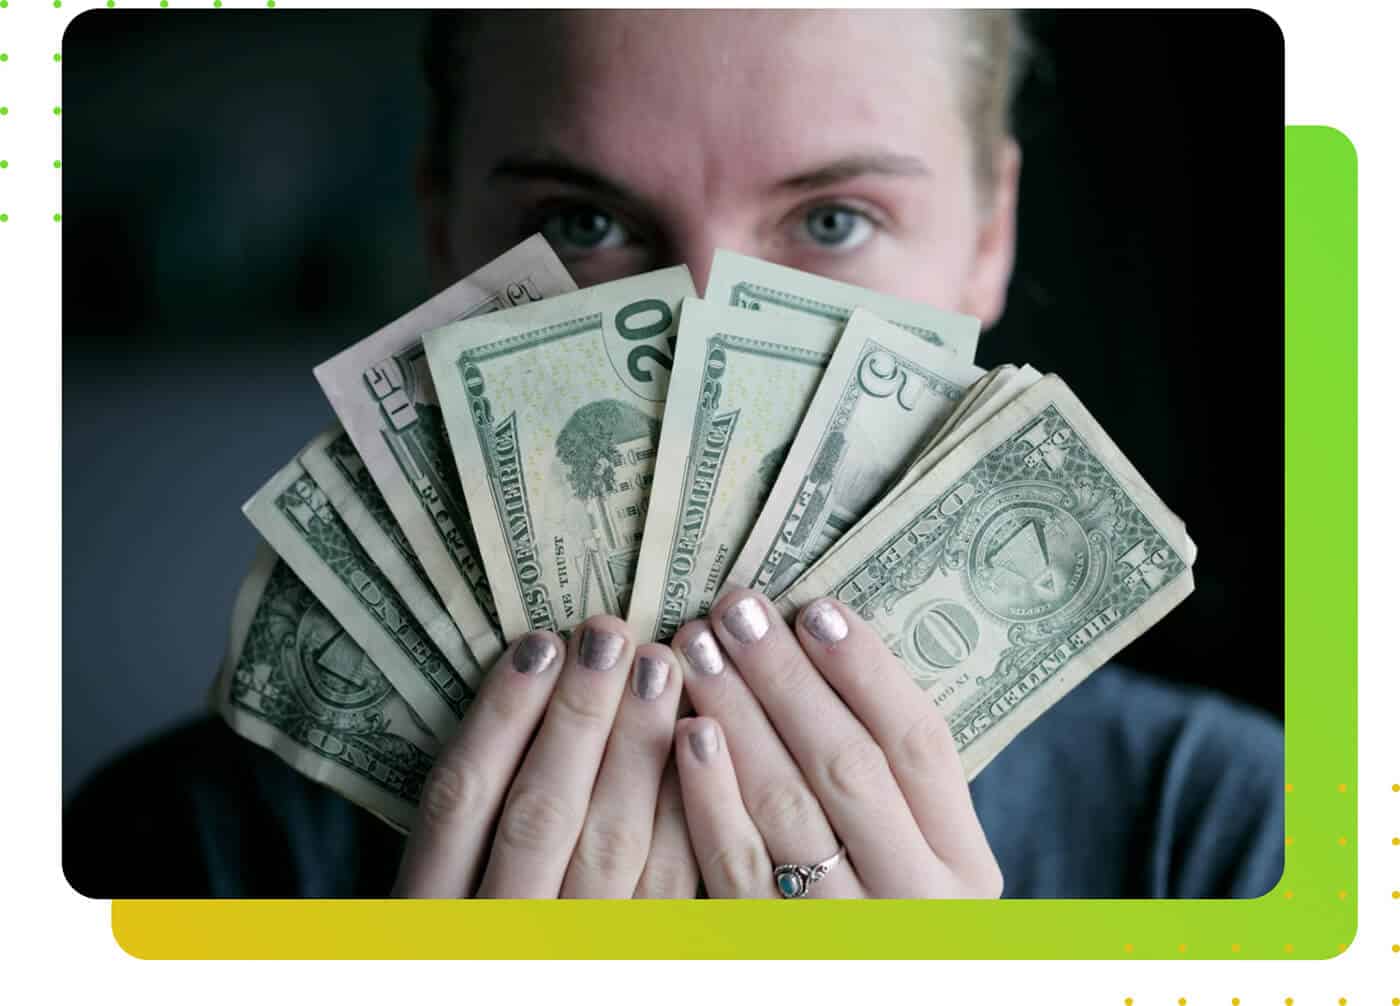 A person holding cash